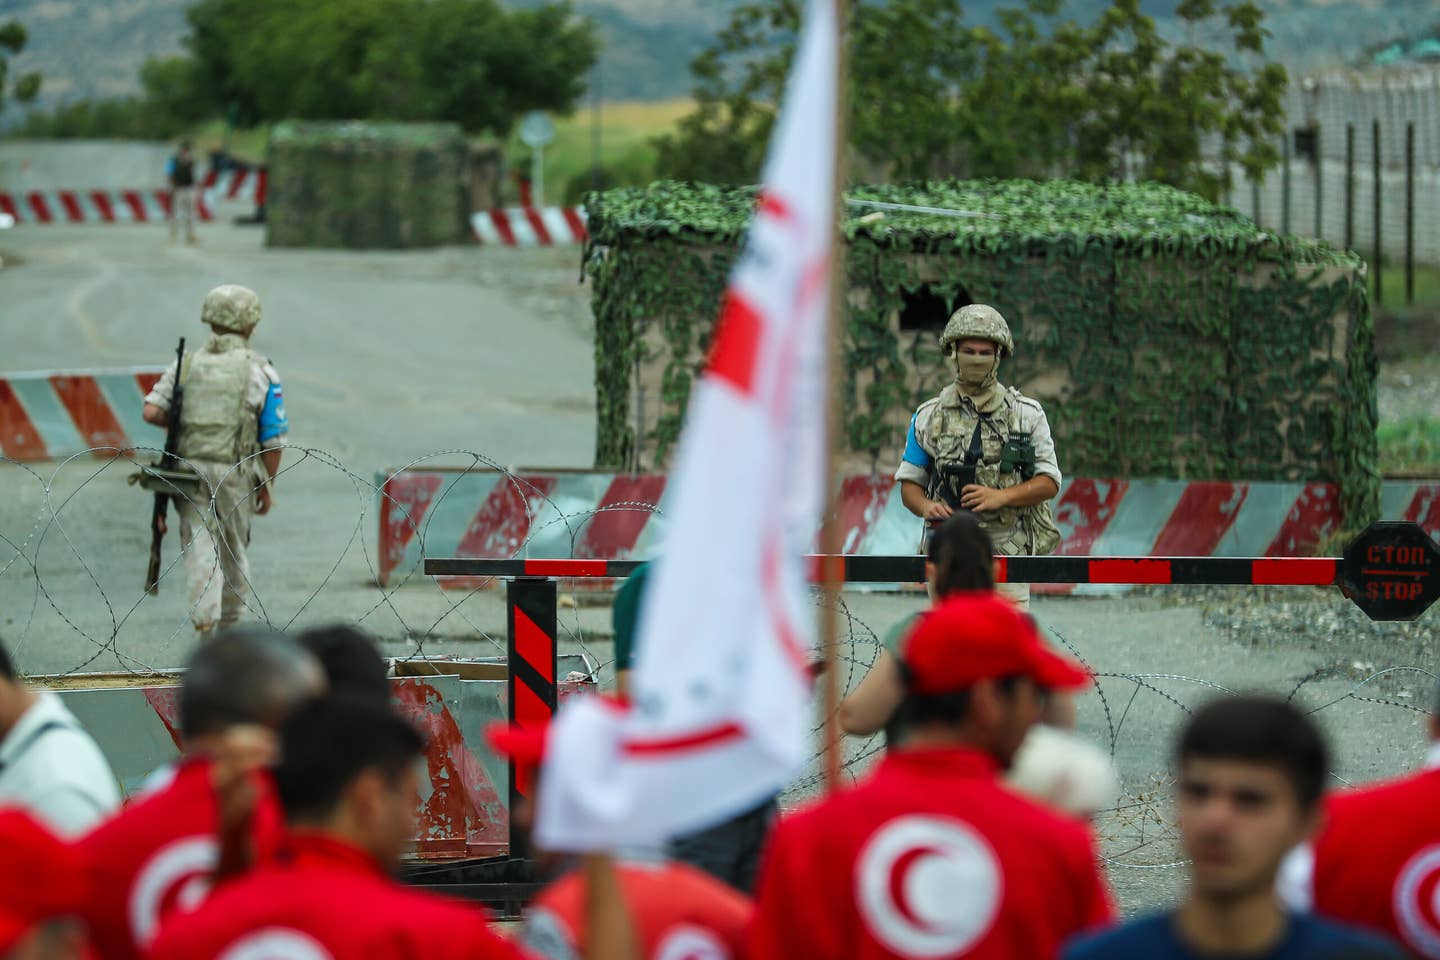 Members of the Red Crescent Society face-to-face with Russian peacekeepers at the Agdam-Khankendi border on August 30, 2023 in Aghdam, Azerbaijan. <em>Photo by Aziz Karimov/Getty Images</em>